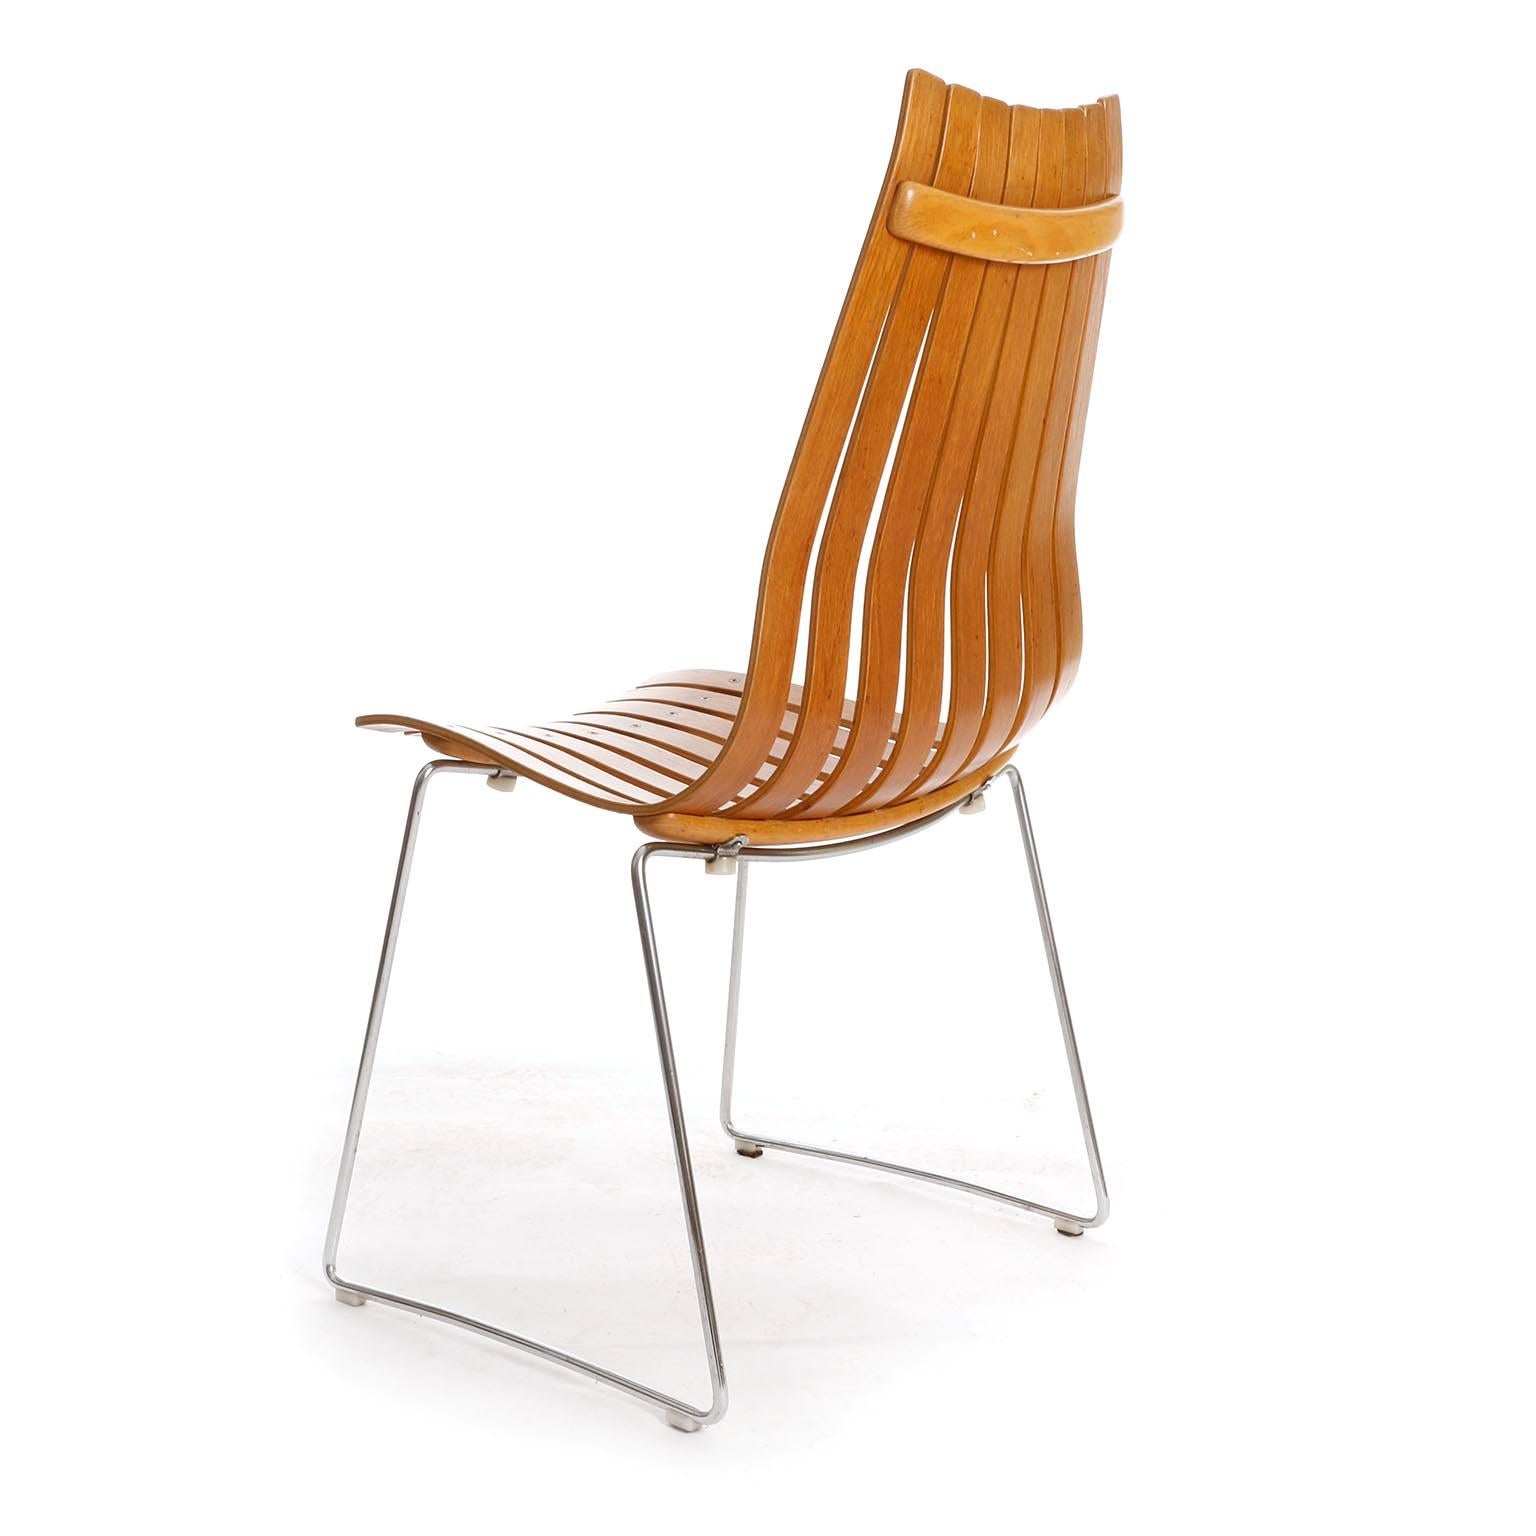 Mid-20th Century Hans Brattrud 'Scandia' Lounge Chair, Norway, 1960 For Sale